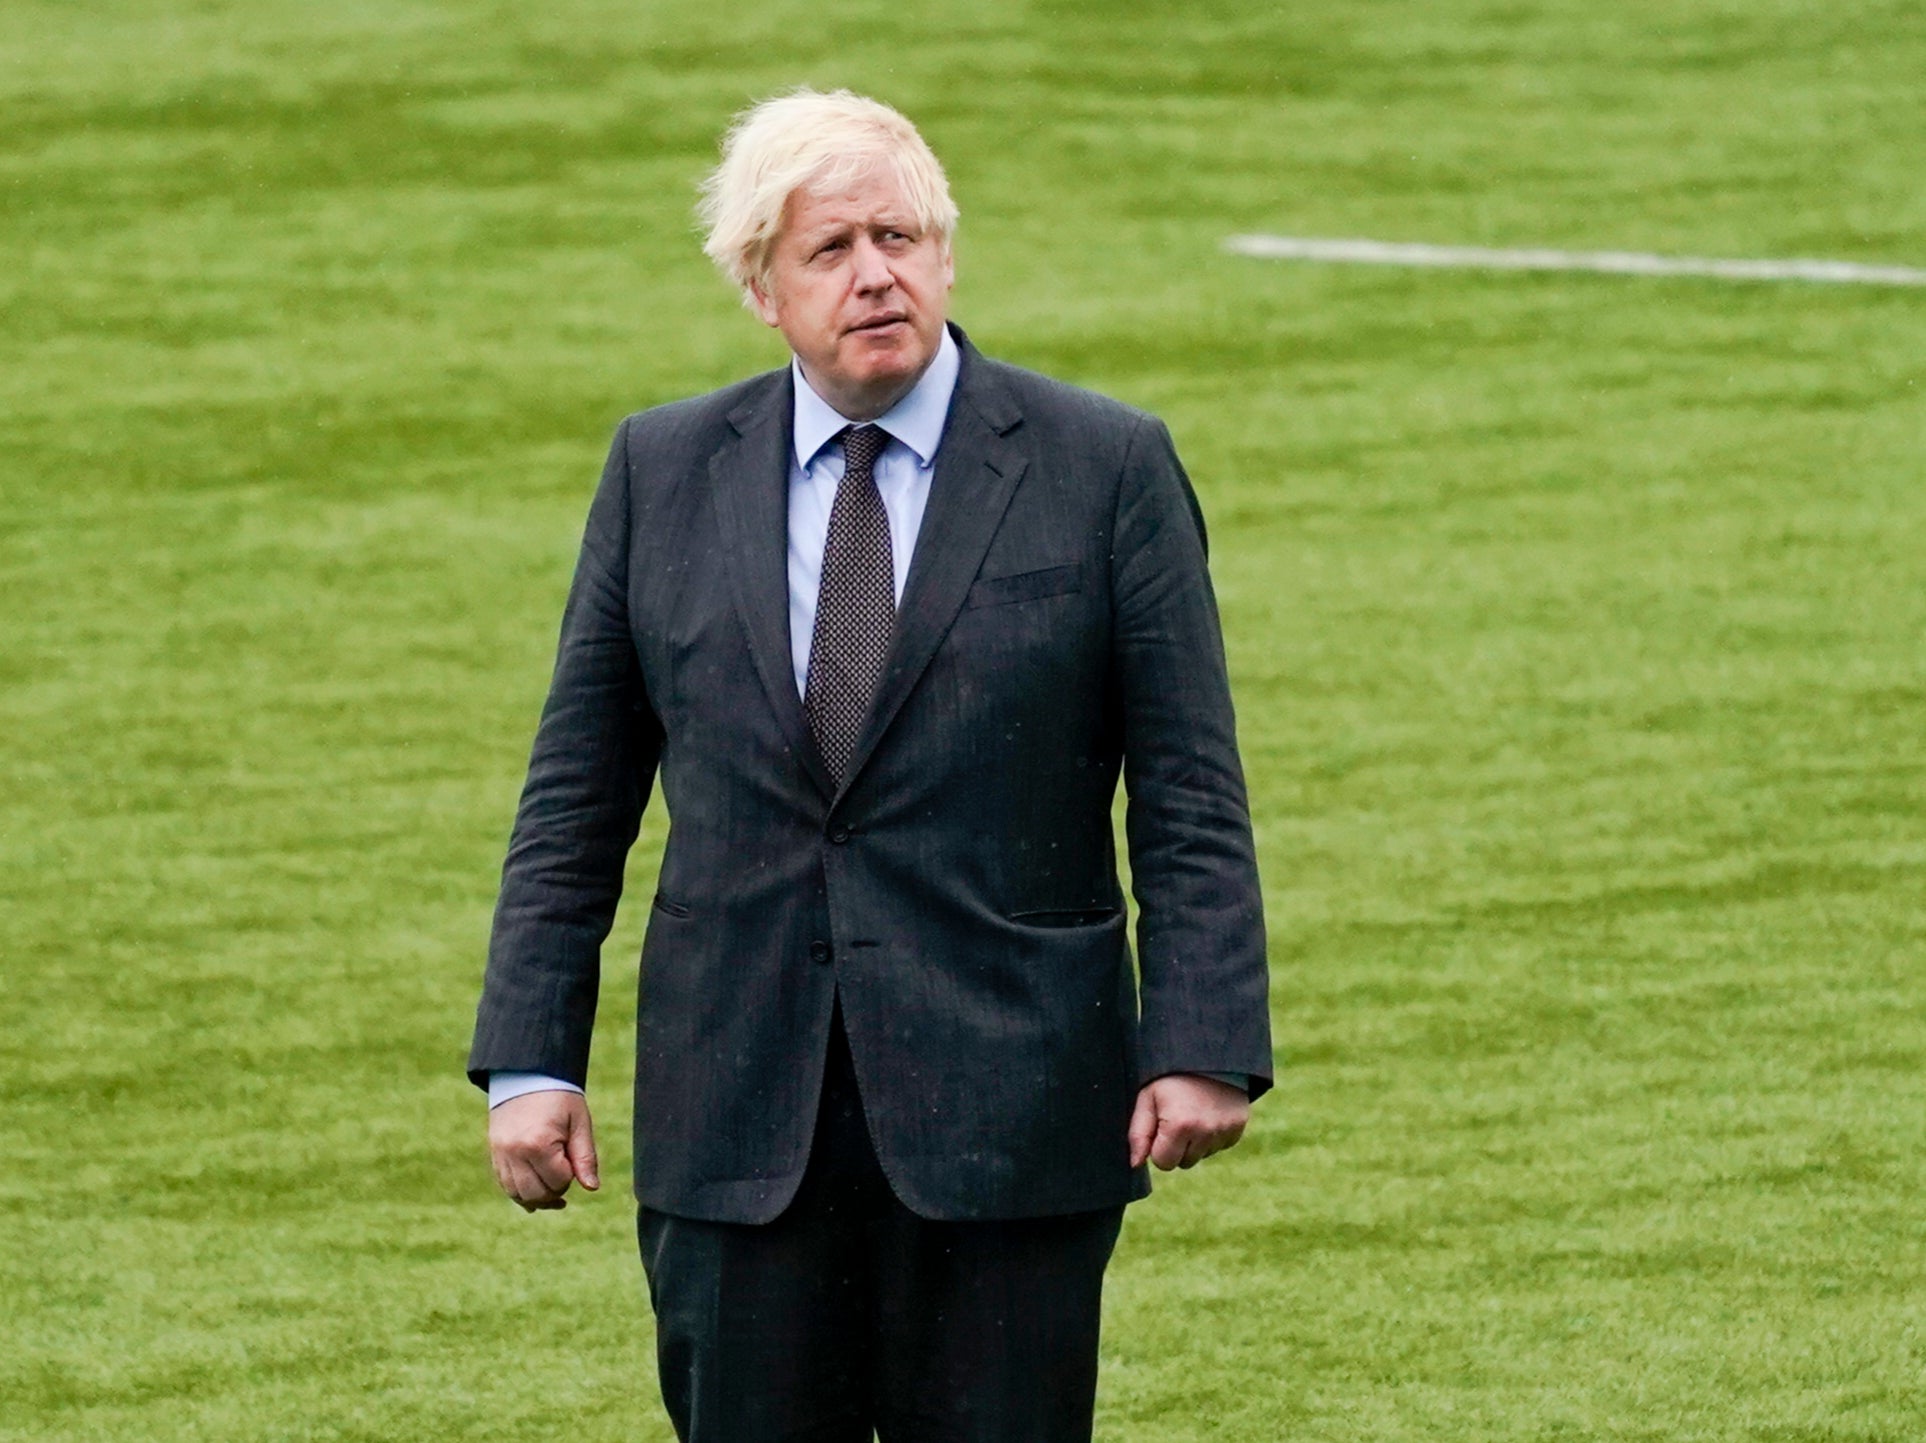 Boris Johnson gave a speech on ‘levelling up’ in Coventry on 15 July